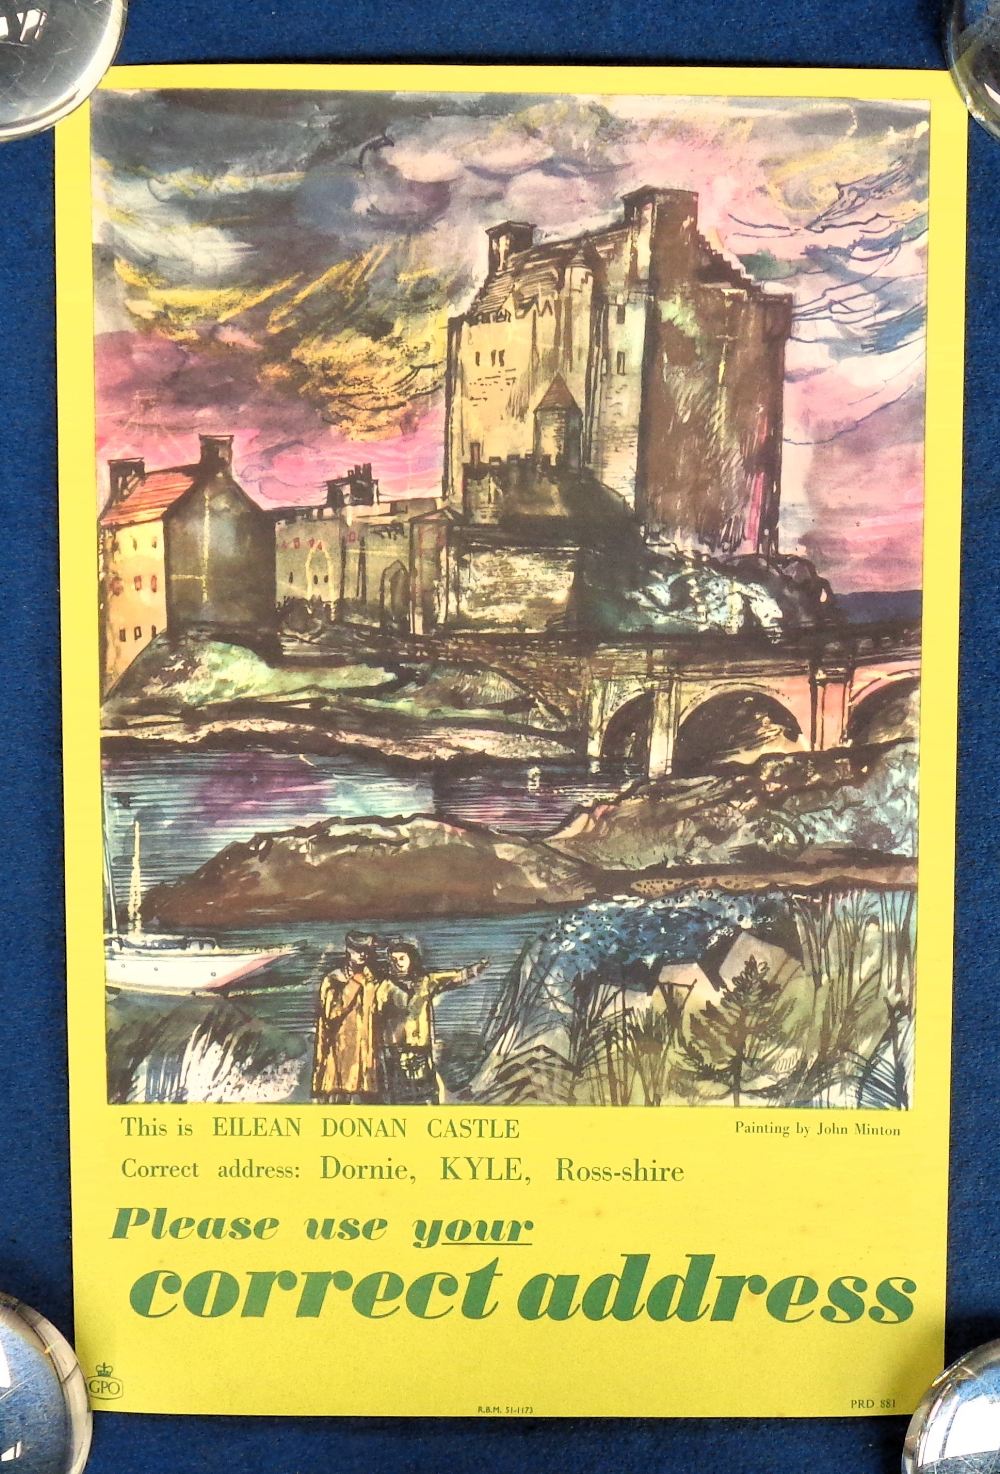 Collectables, Poster, original lithograph poster with artwork by John Minton, depicting Eilean Donan